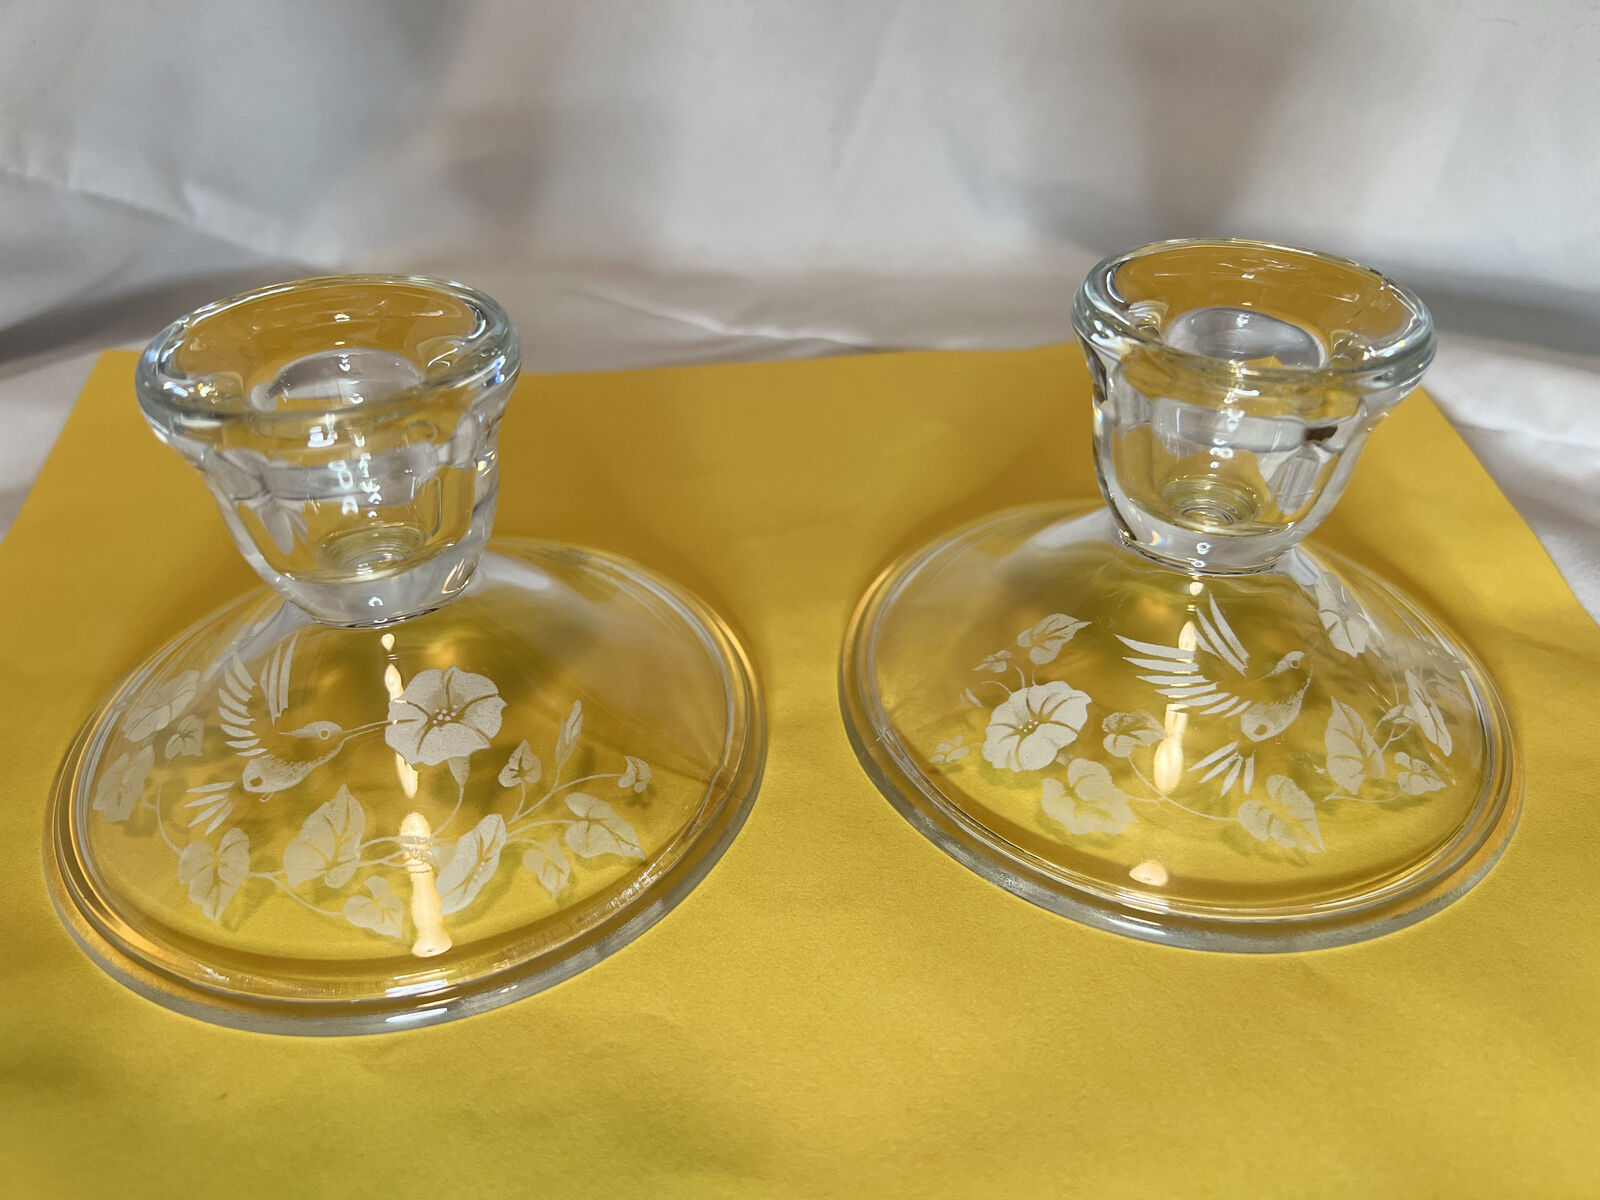 Vintage 1980'S 24% Lead Crystal Etched Hummingbird Candle Holders (2)